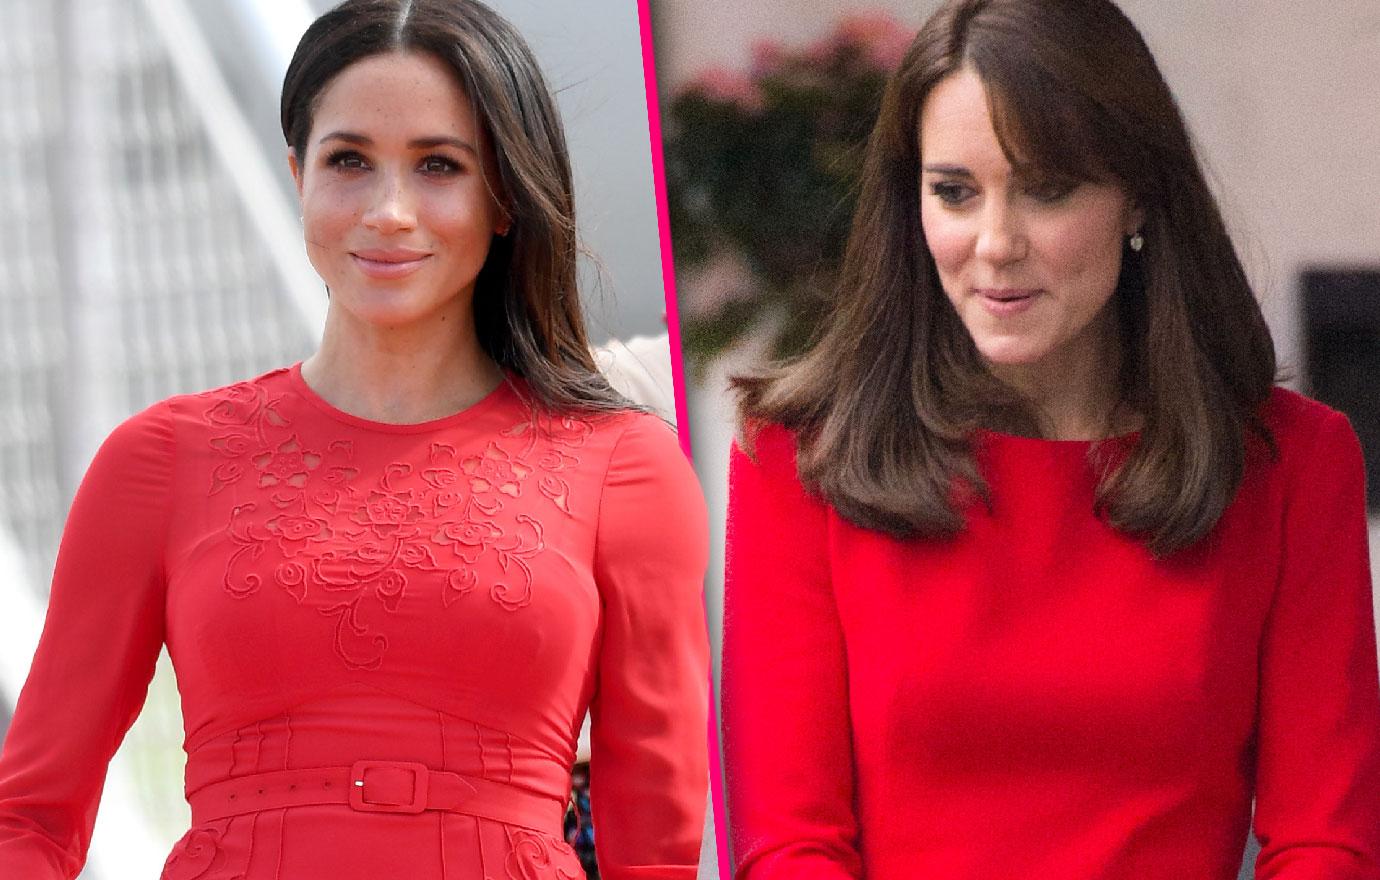 Palace Insiders Claim Meghan Markle Is Copying Kate Middleton’s Fashion